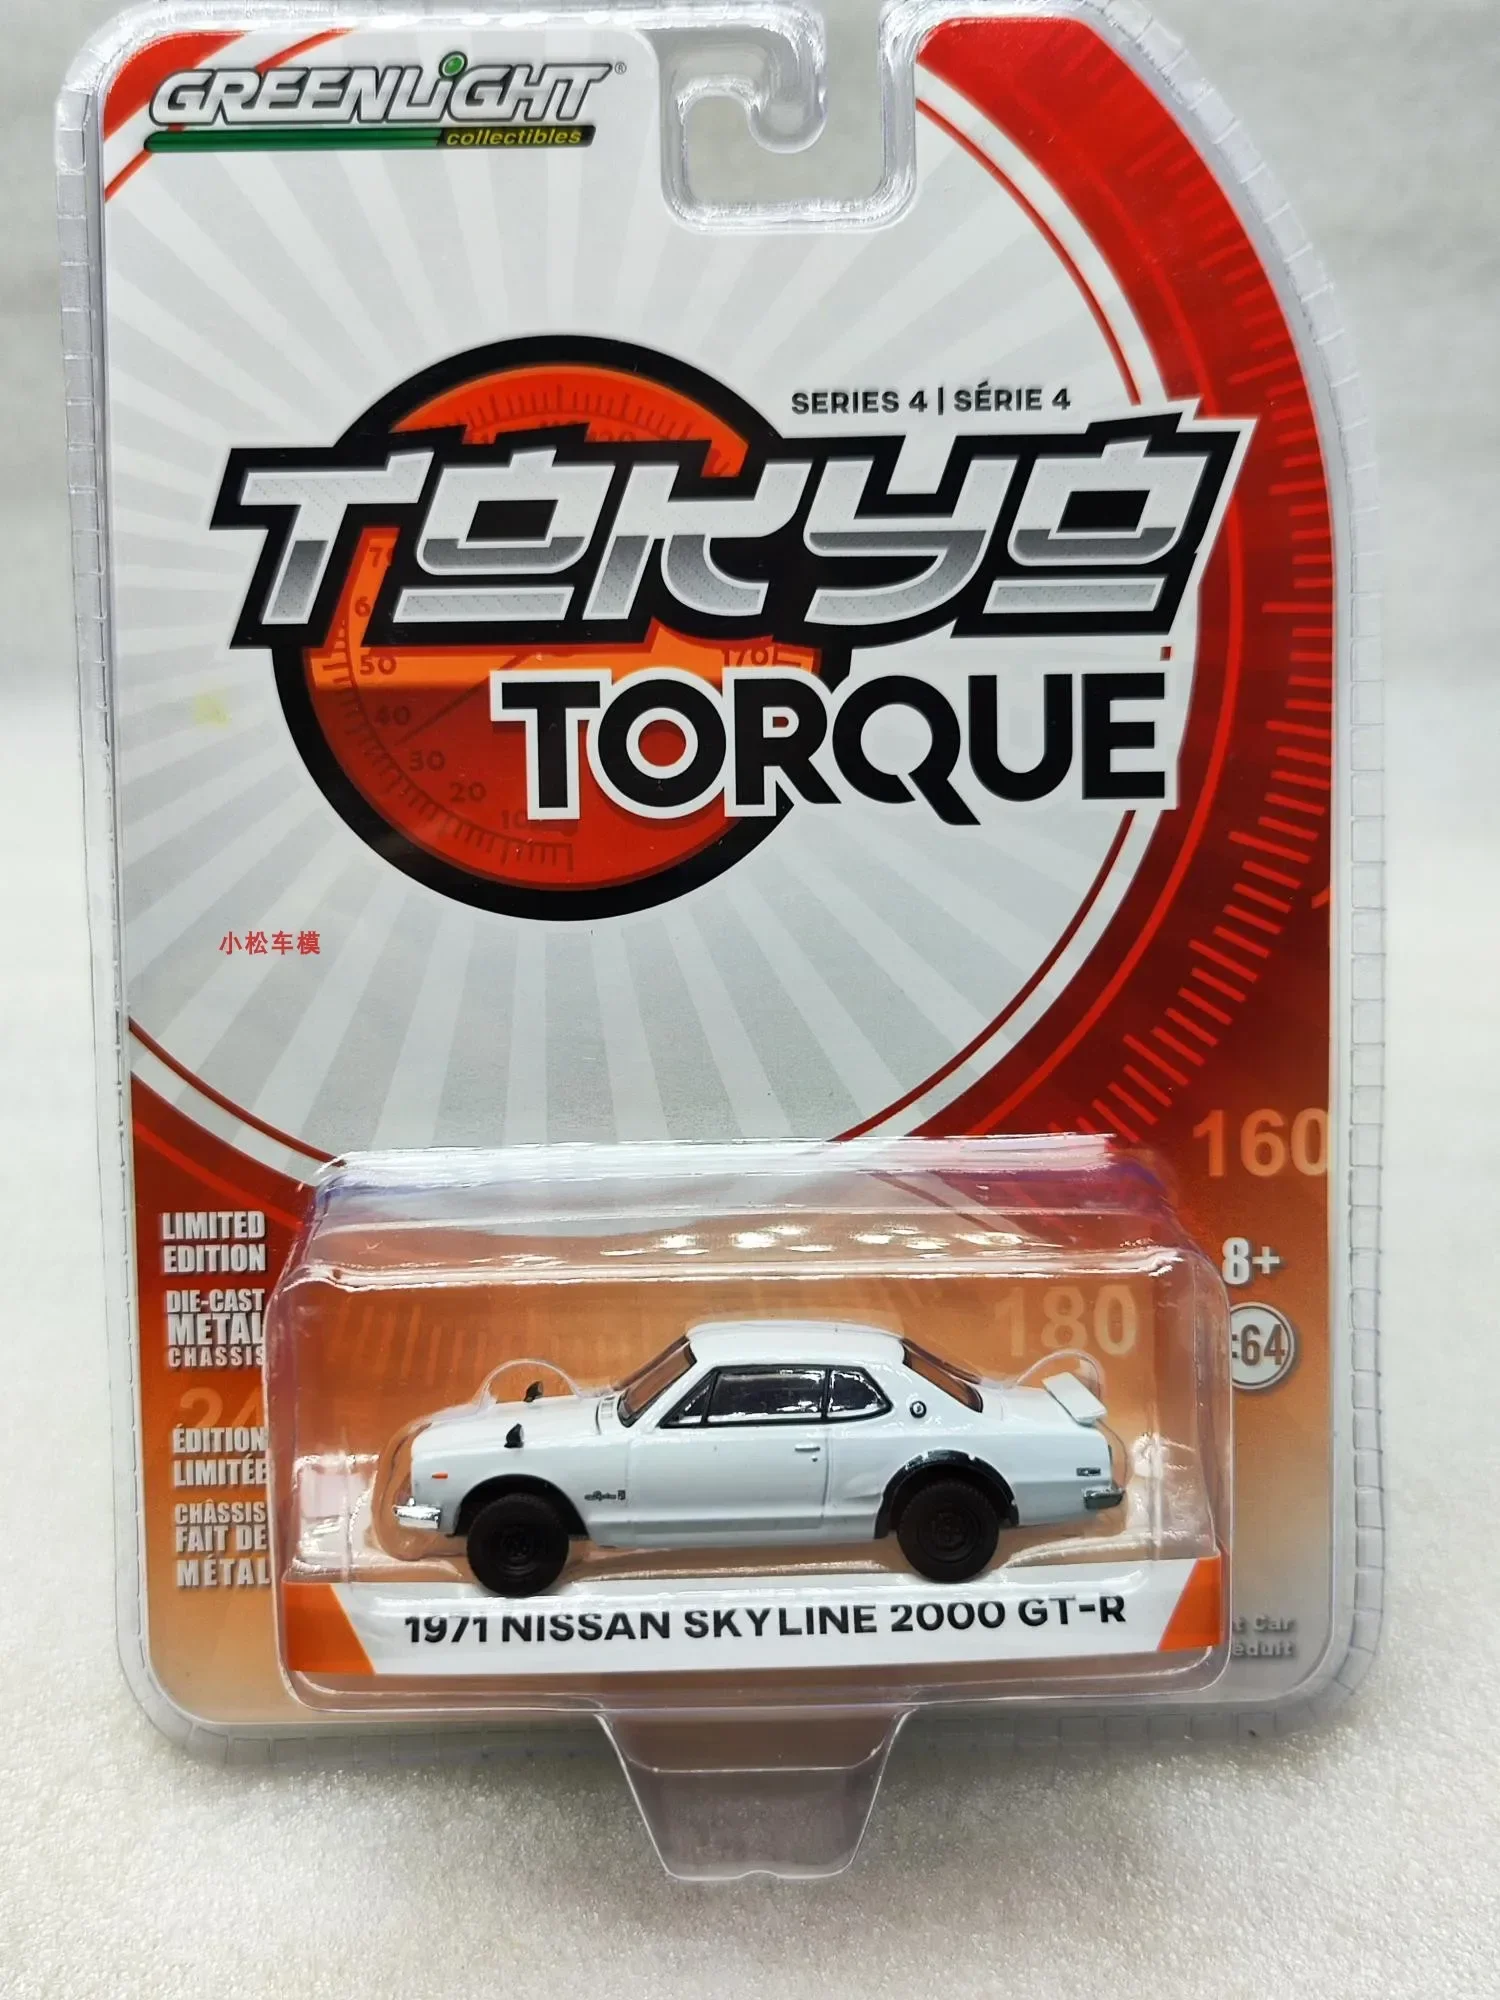 

1:64 1971 Nissan Skyline 2000 GT-R Diecast Metal Alloy Model Car Toys For Gift Collection W1094